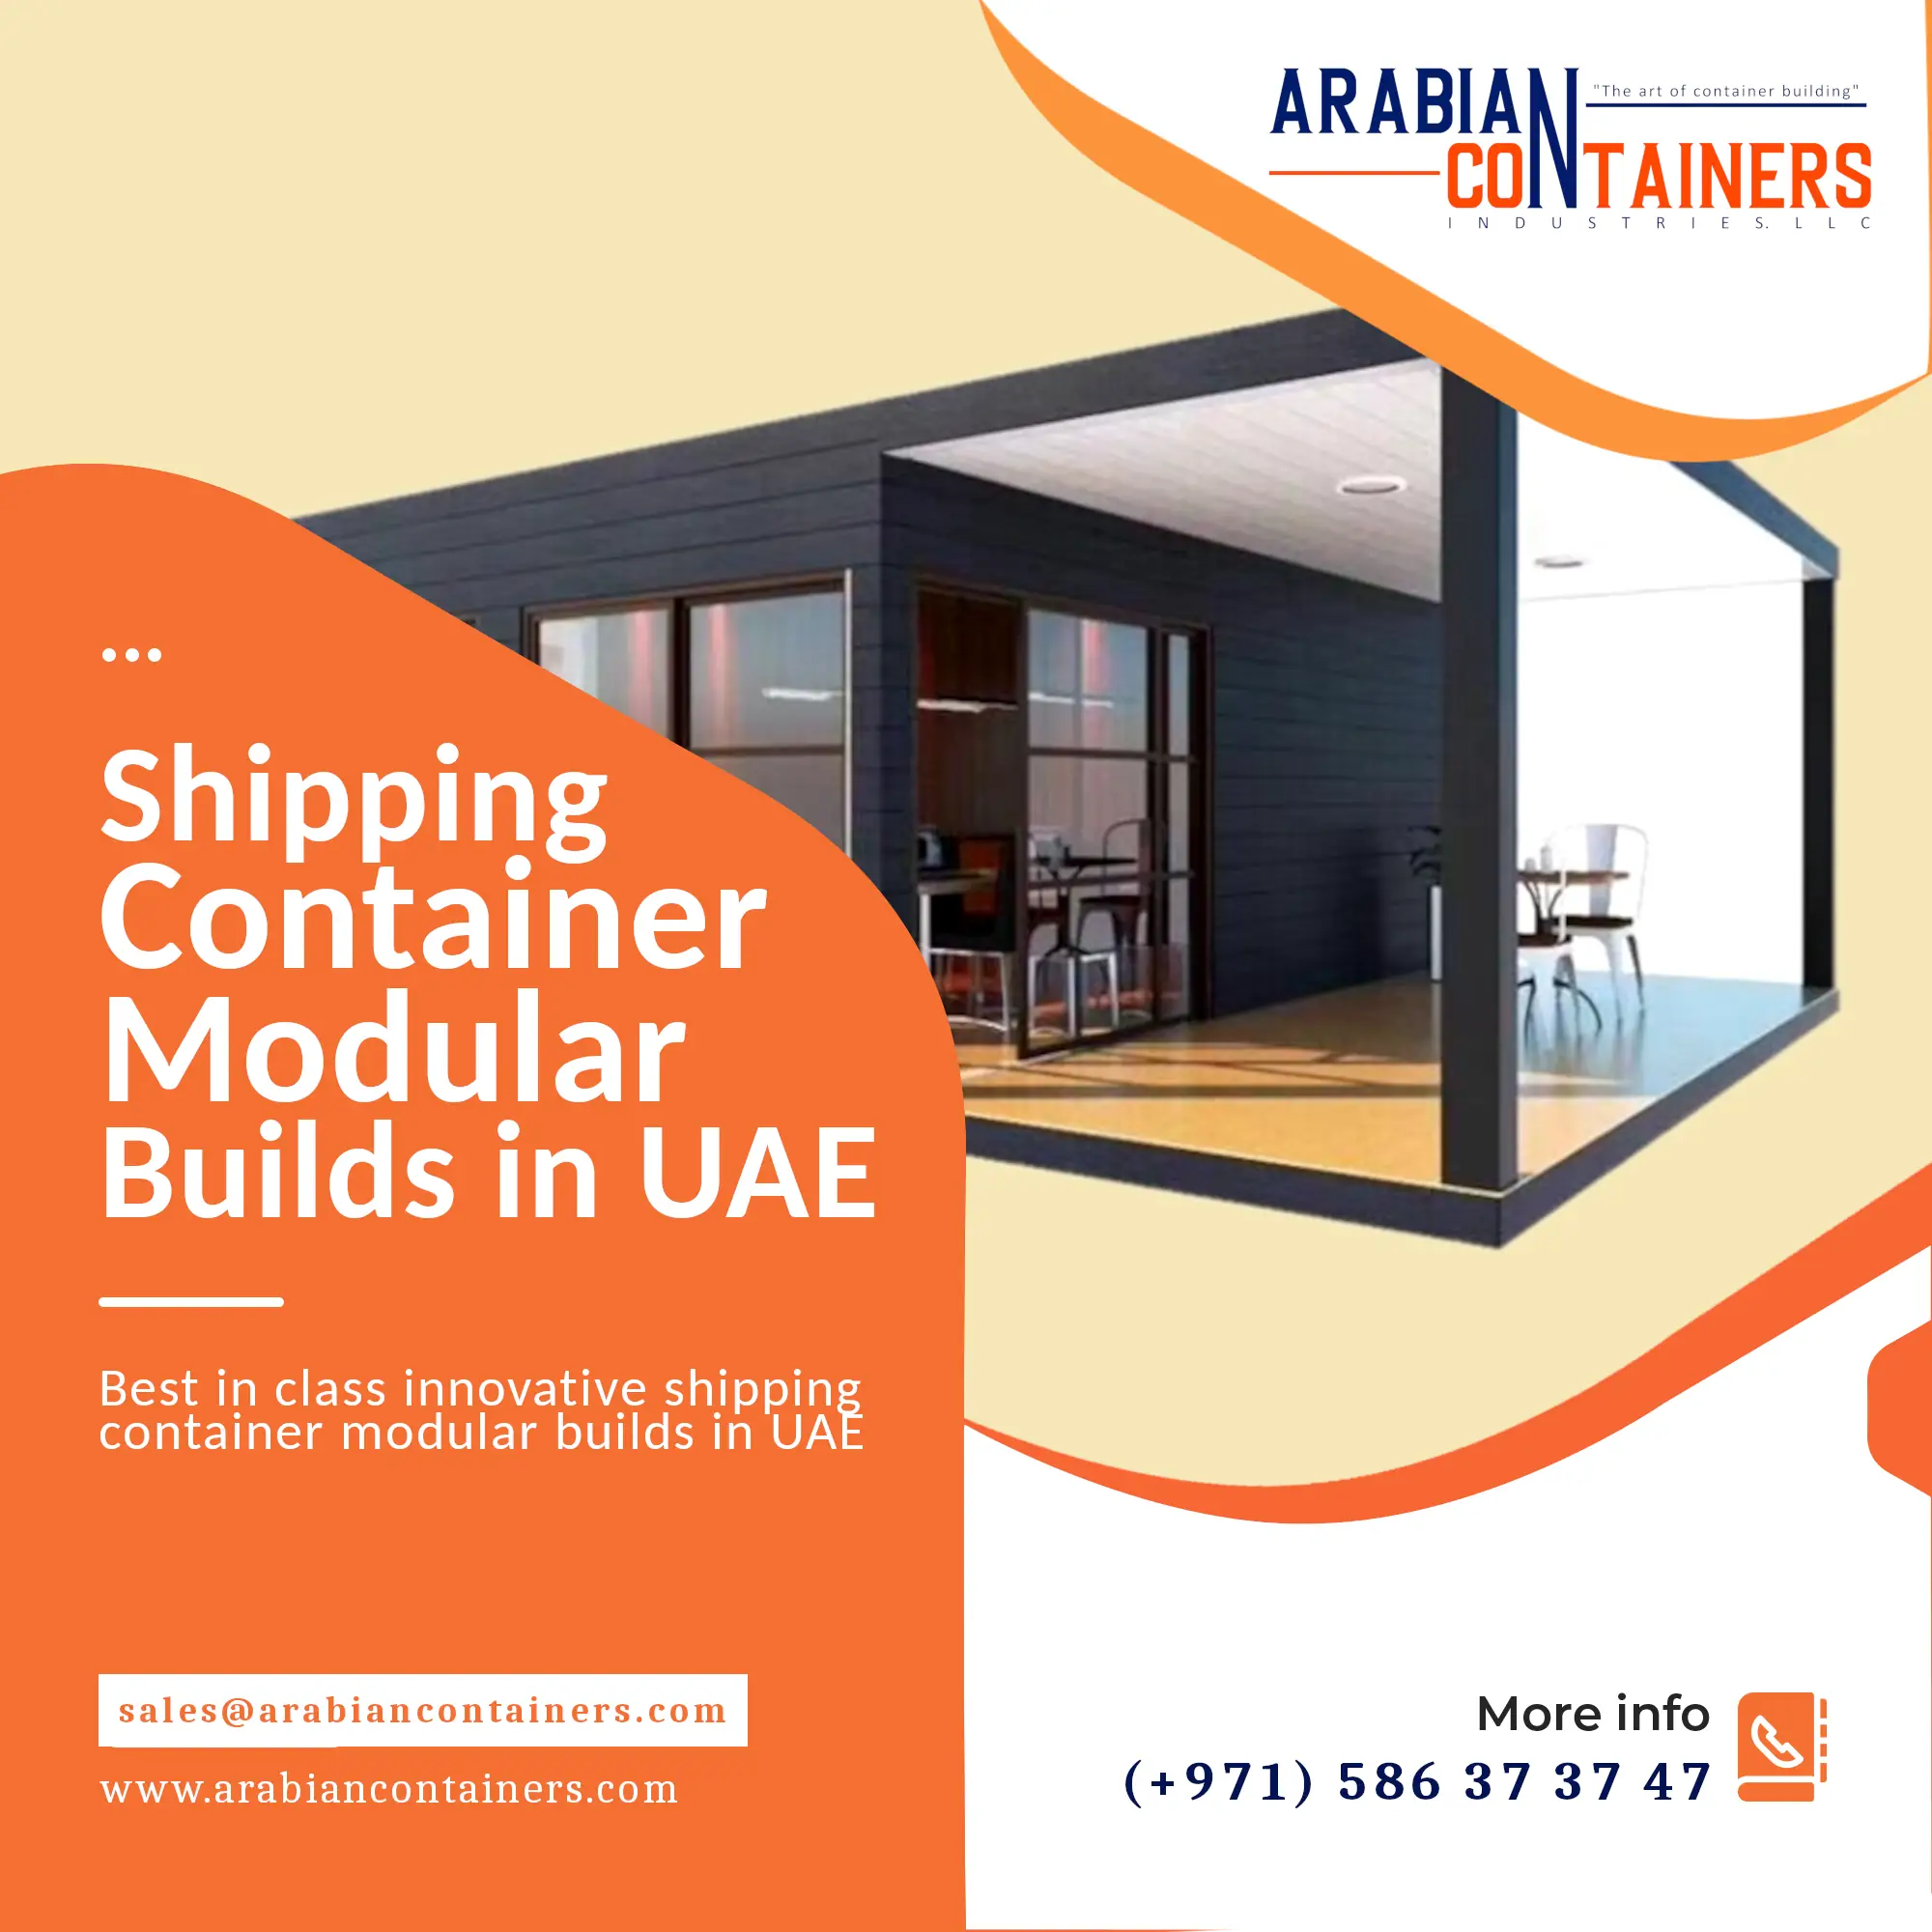 Shipping container modular builds company UAE